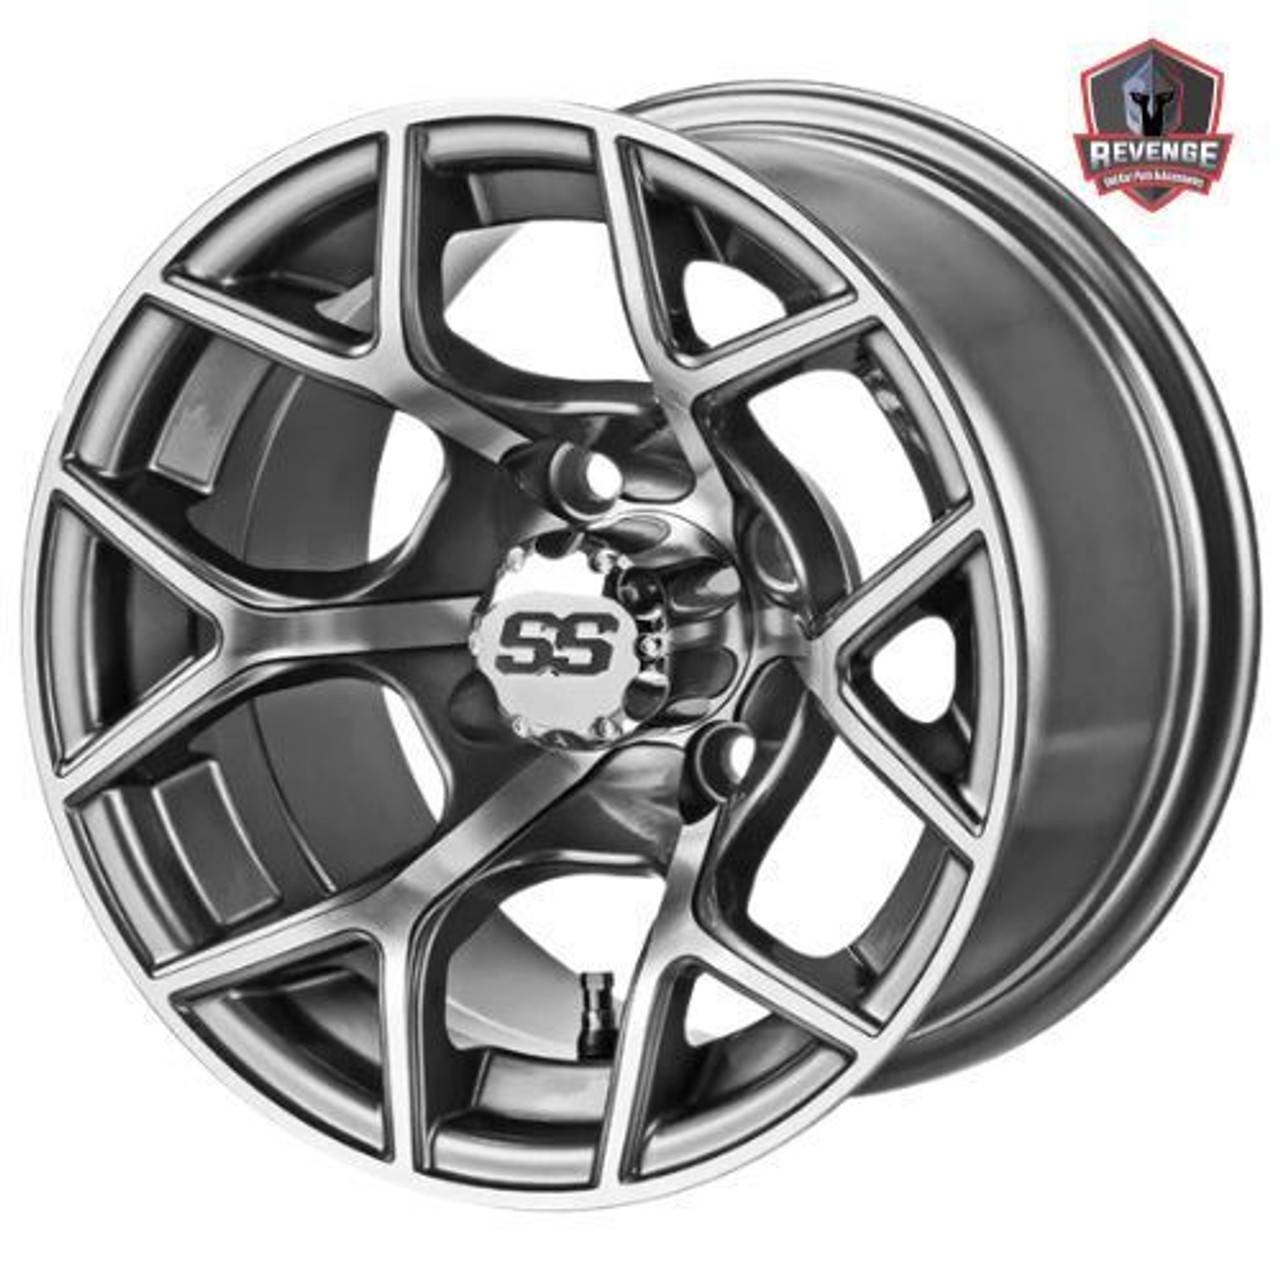 12" Epic Golf Cart Wheels and Tires Combo Set of 4 for E20 and E40 Non-Lifted, ISL-60521-06121-4XEP